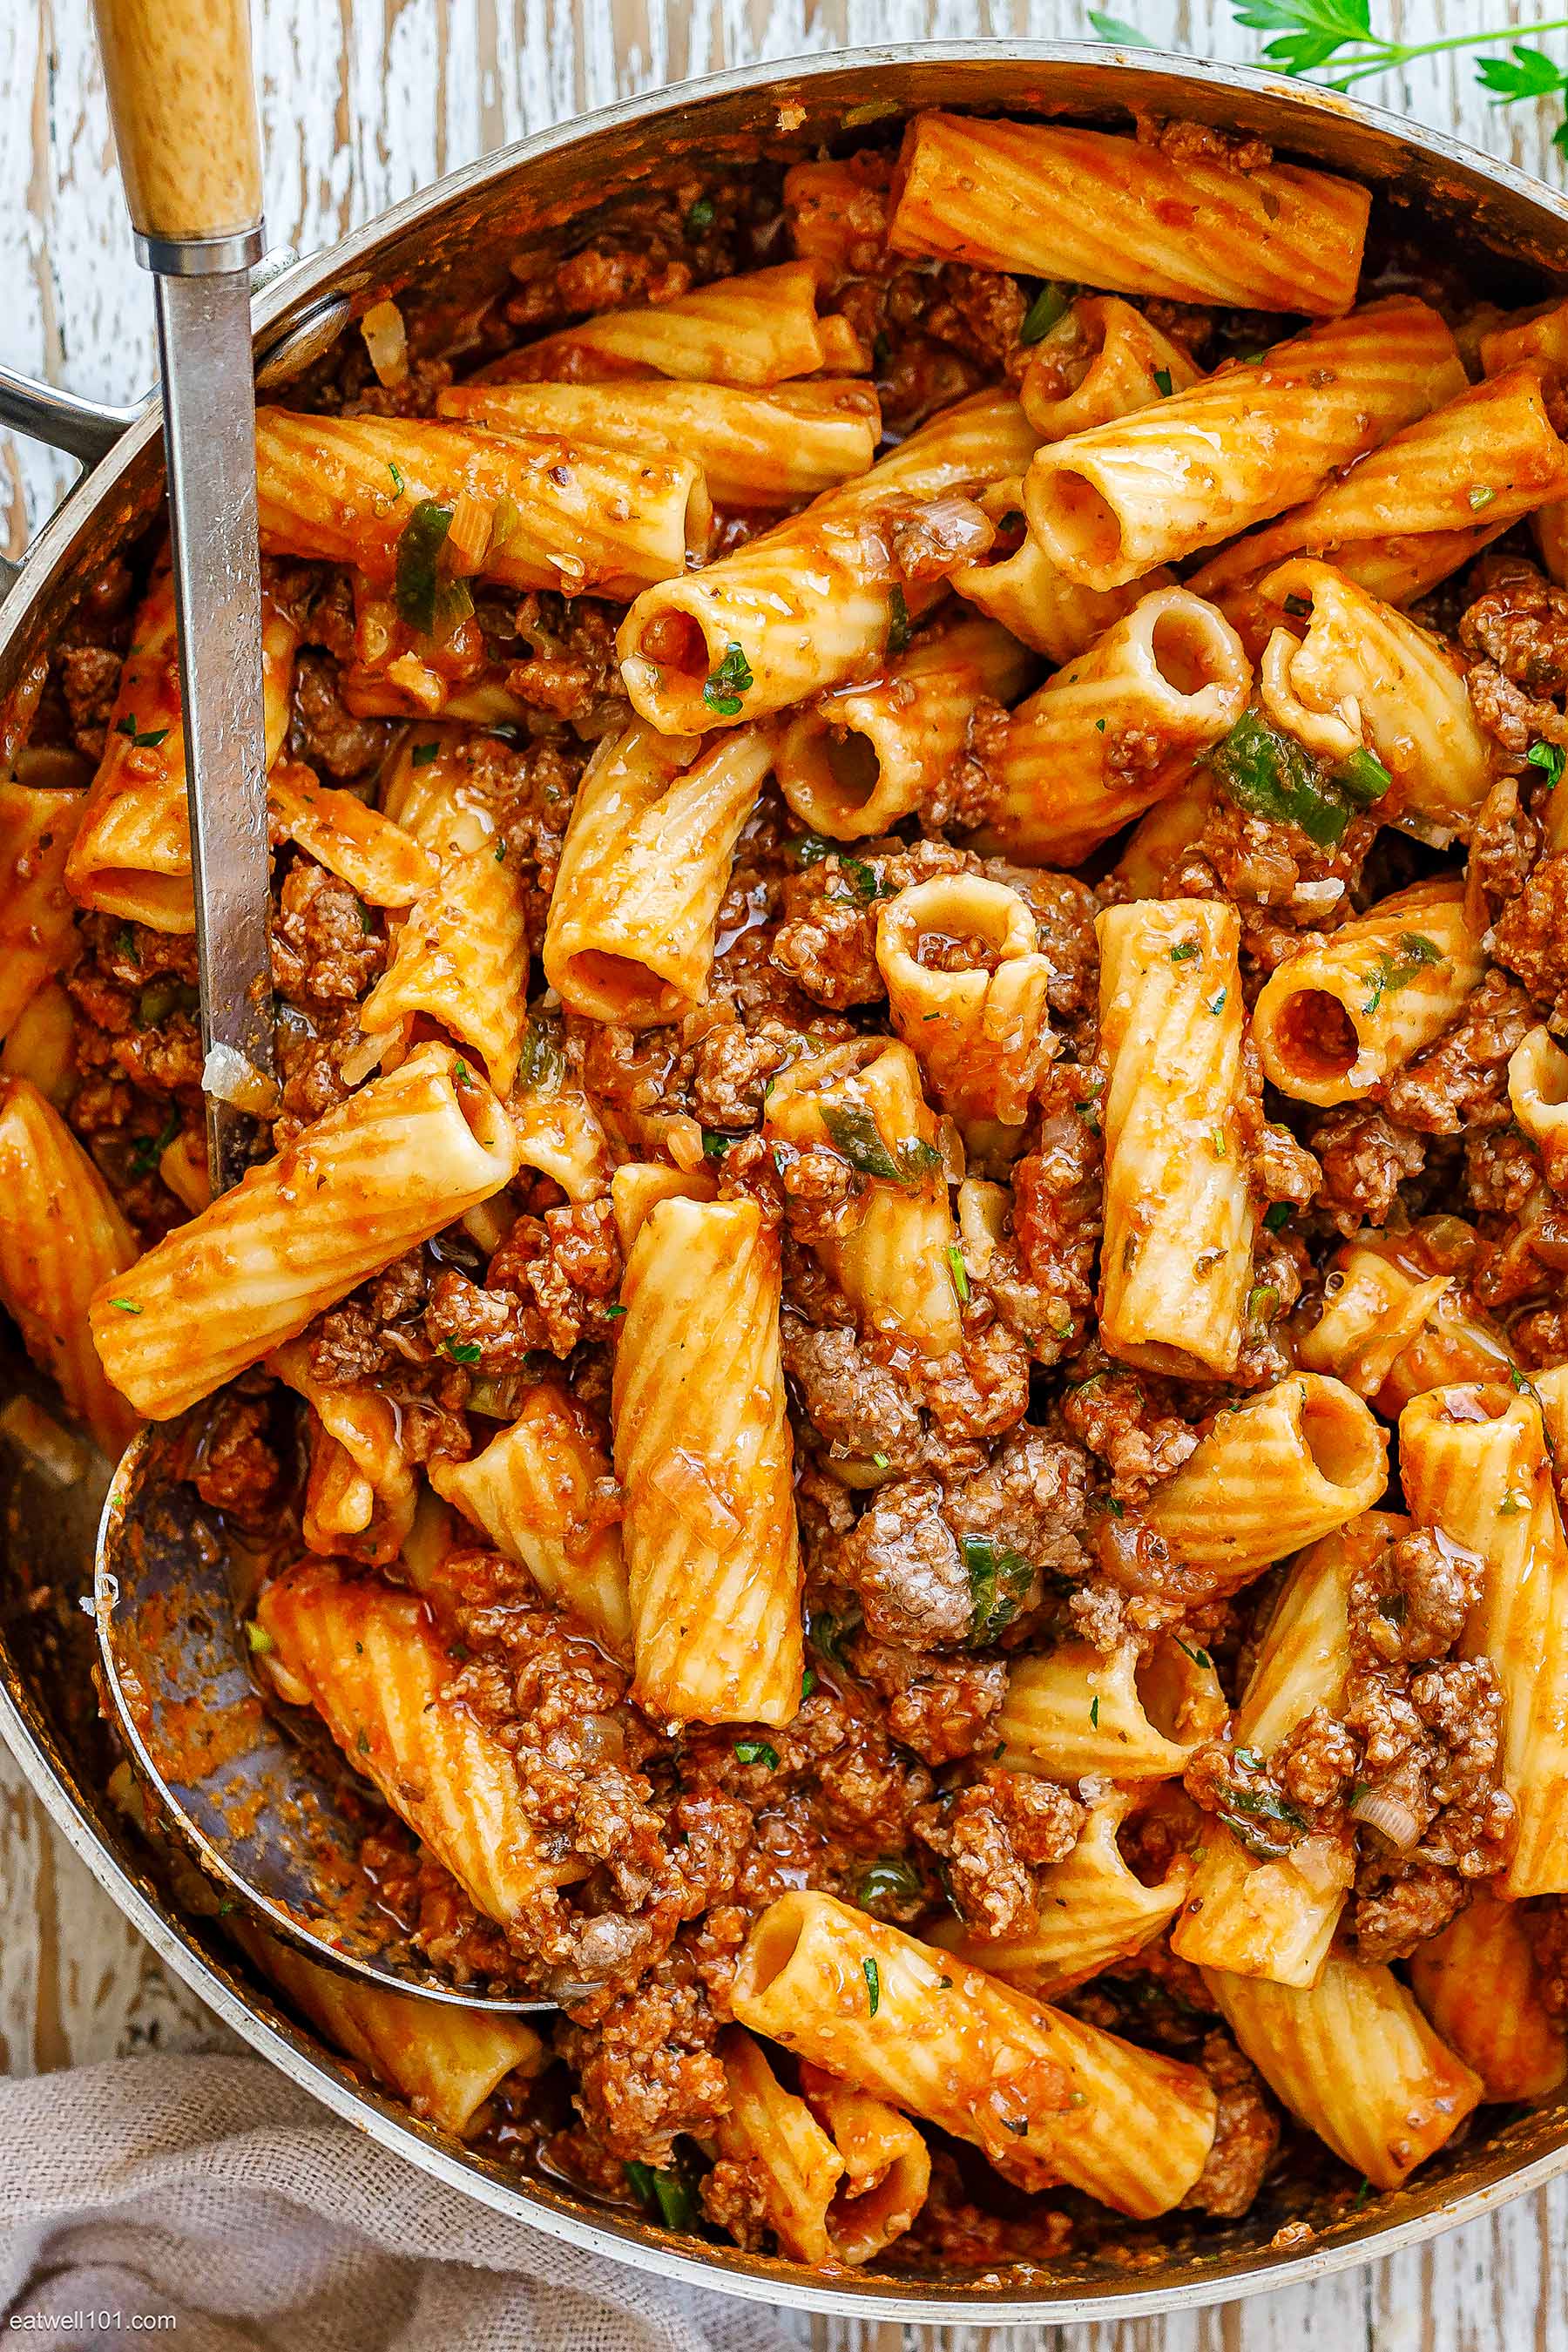 https://www.eatwell101.com/wp-content/uploads/2022/05/How-to-make-beef-pasta.jpg